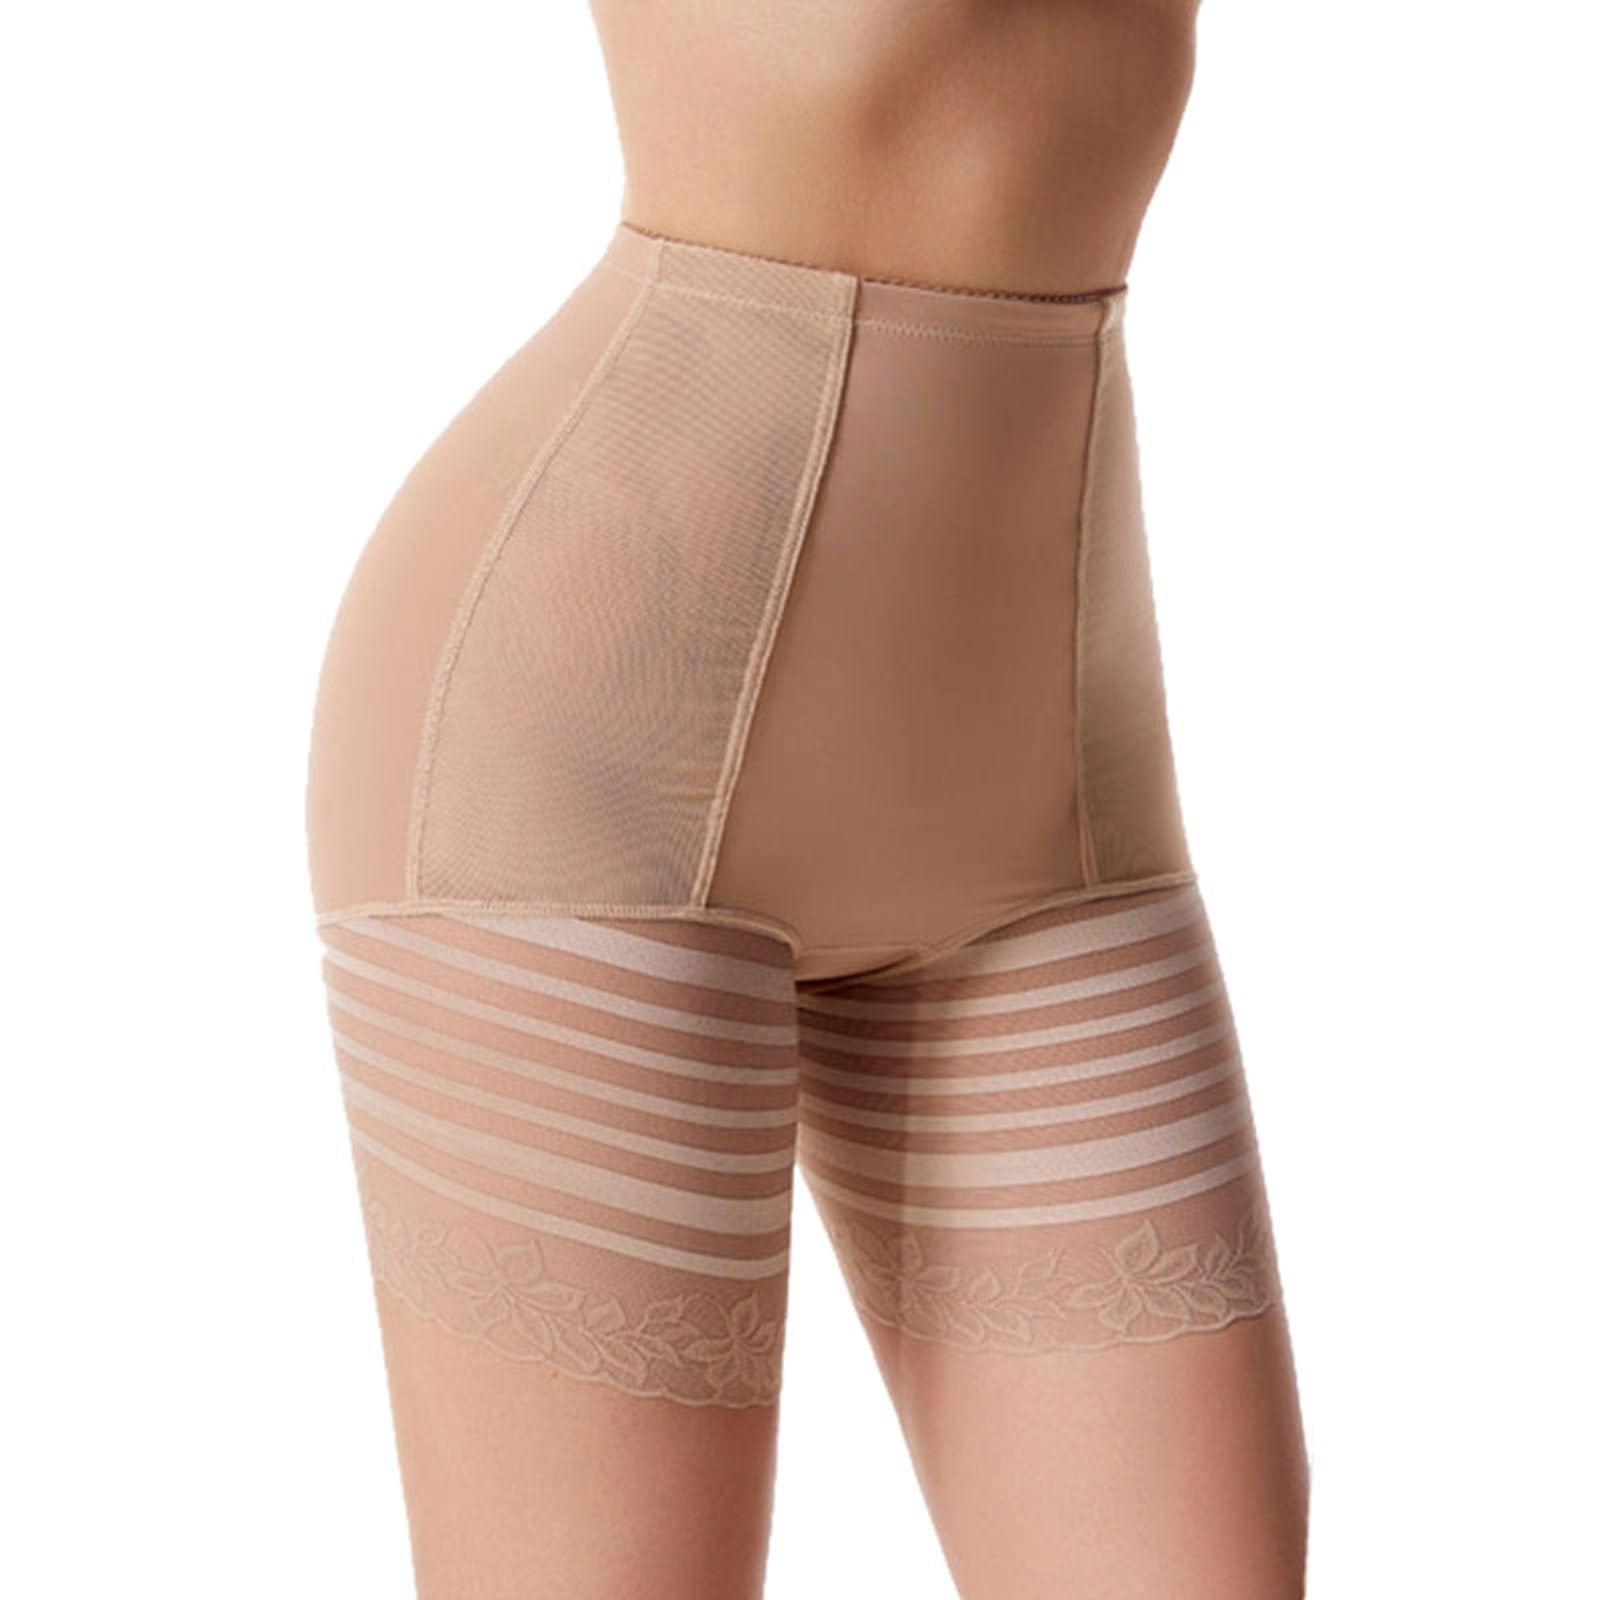 JDEFEG Lace Slip Shorts Womens Briefs Lifter Padded Control